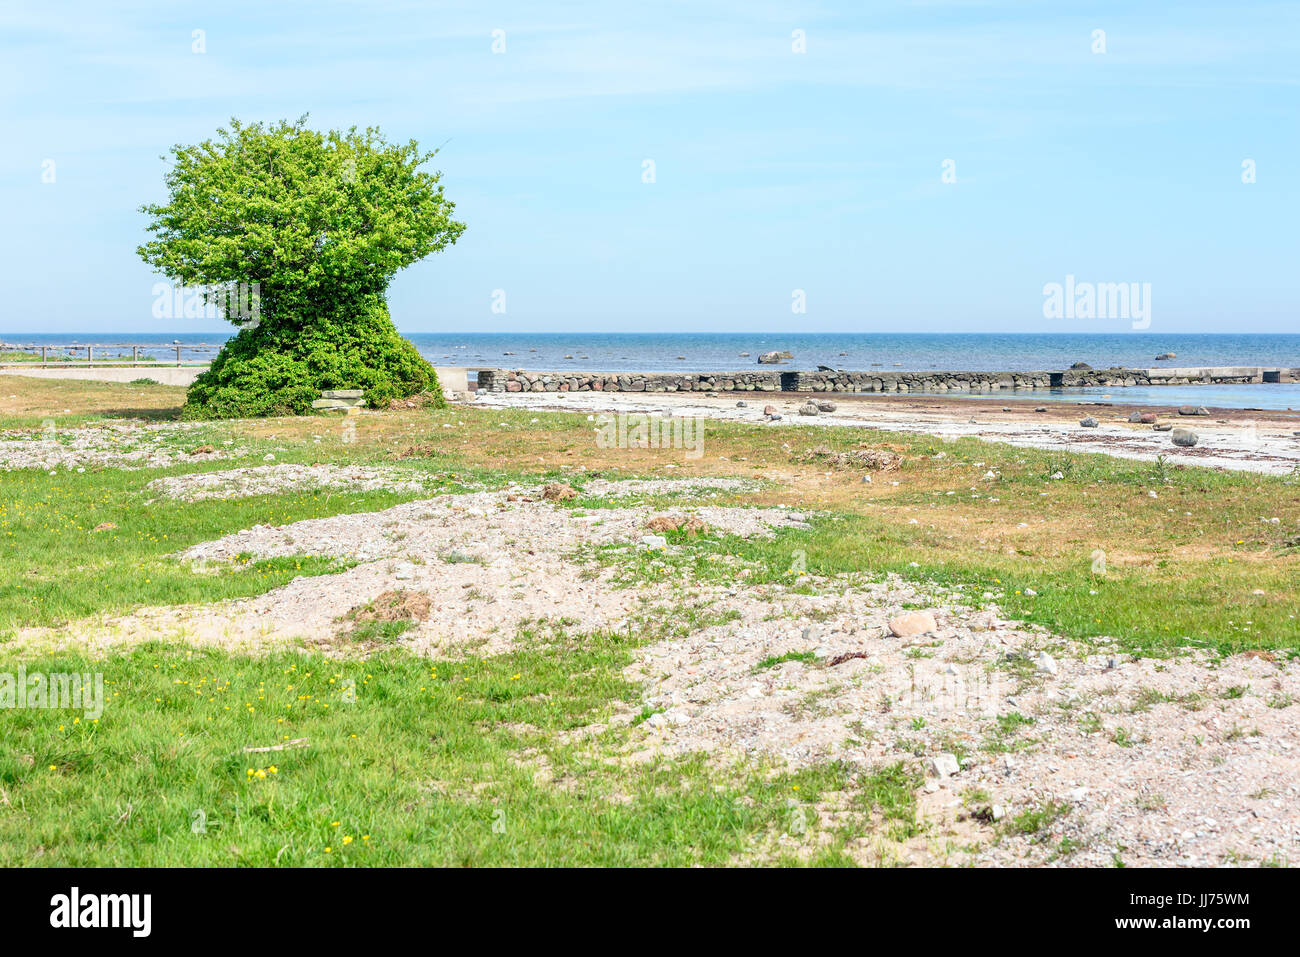 Strange and solitary tree growing on beach. Tree is overgrown with leaves from top to bottom. Stock Photo